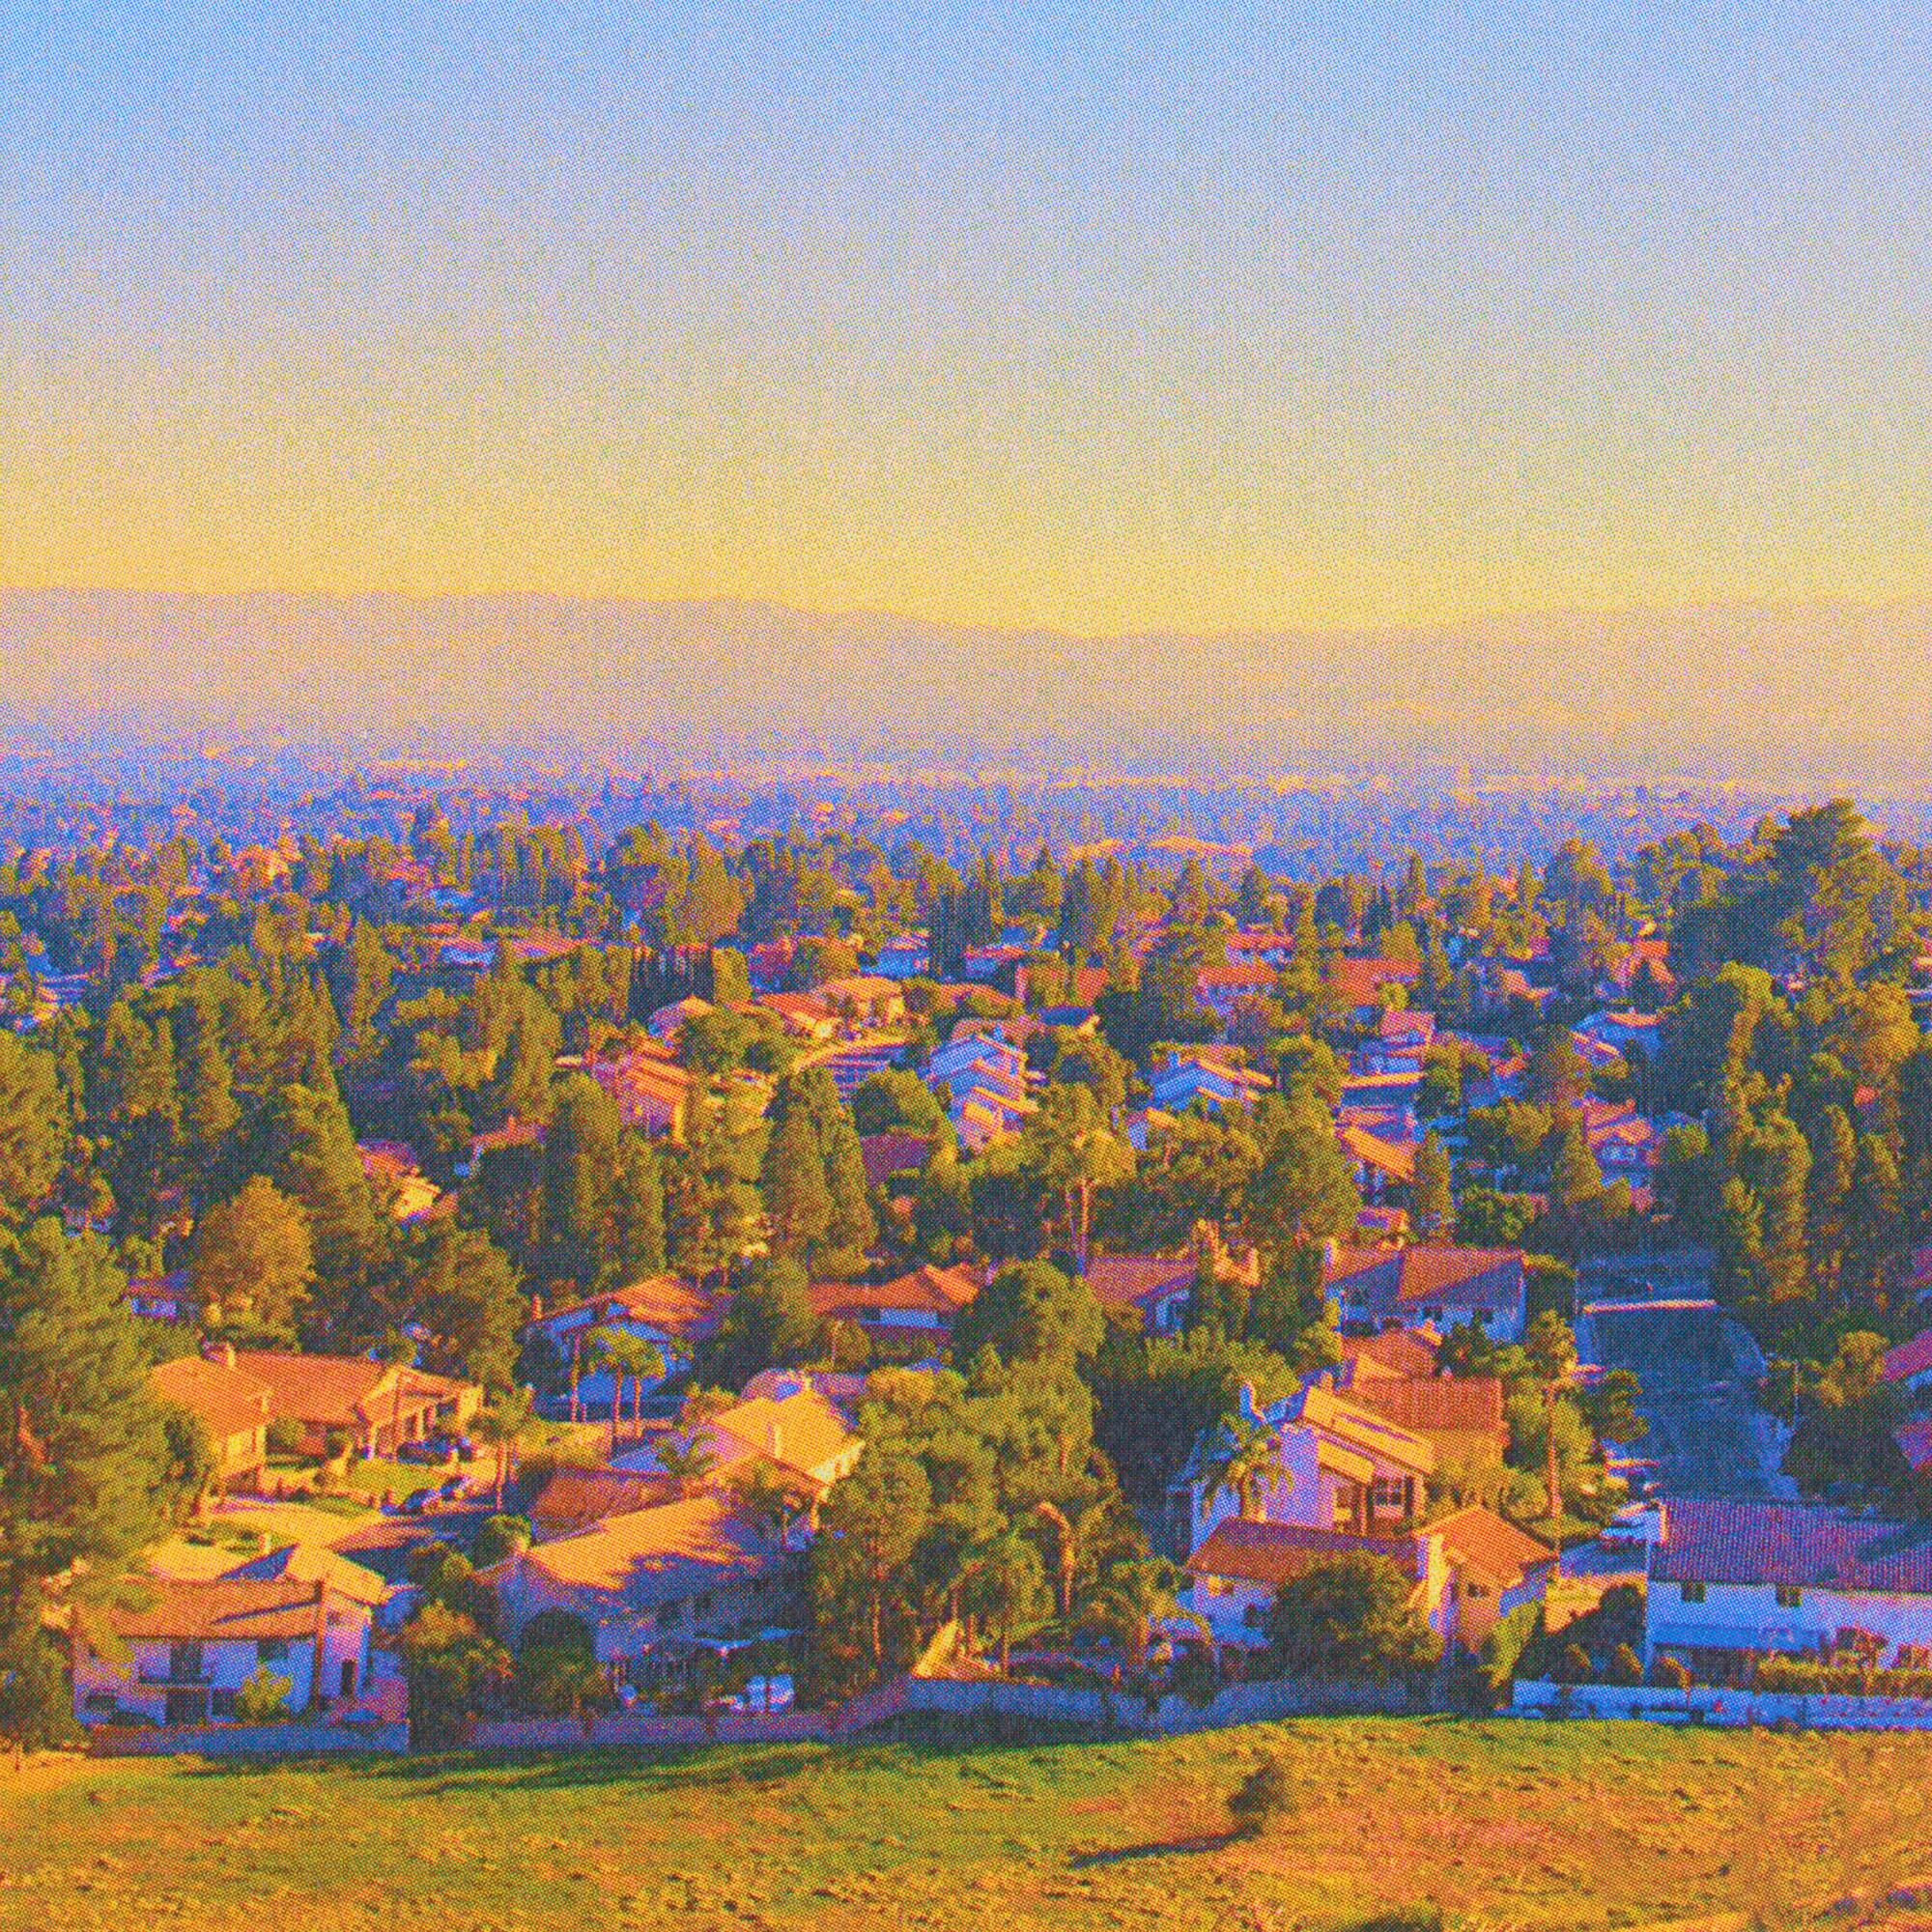 A photo of the suburban landscape, trees and houses replicating into the distance.